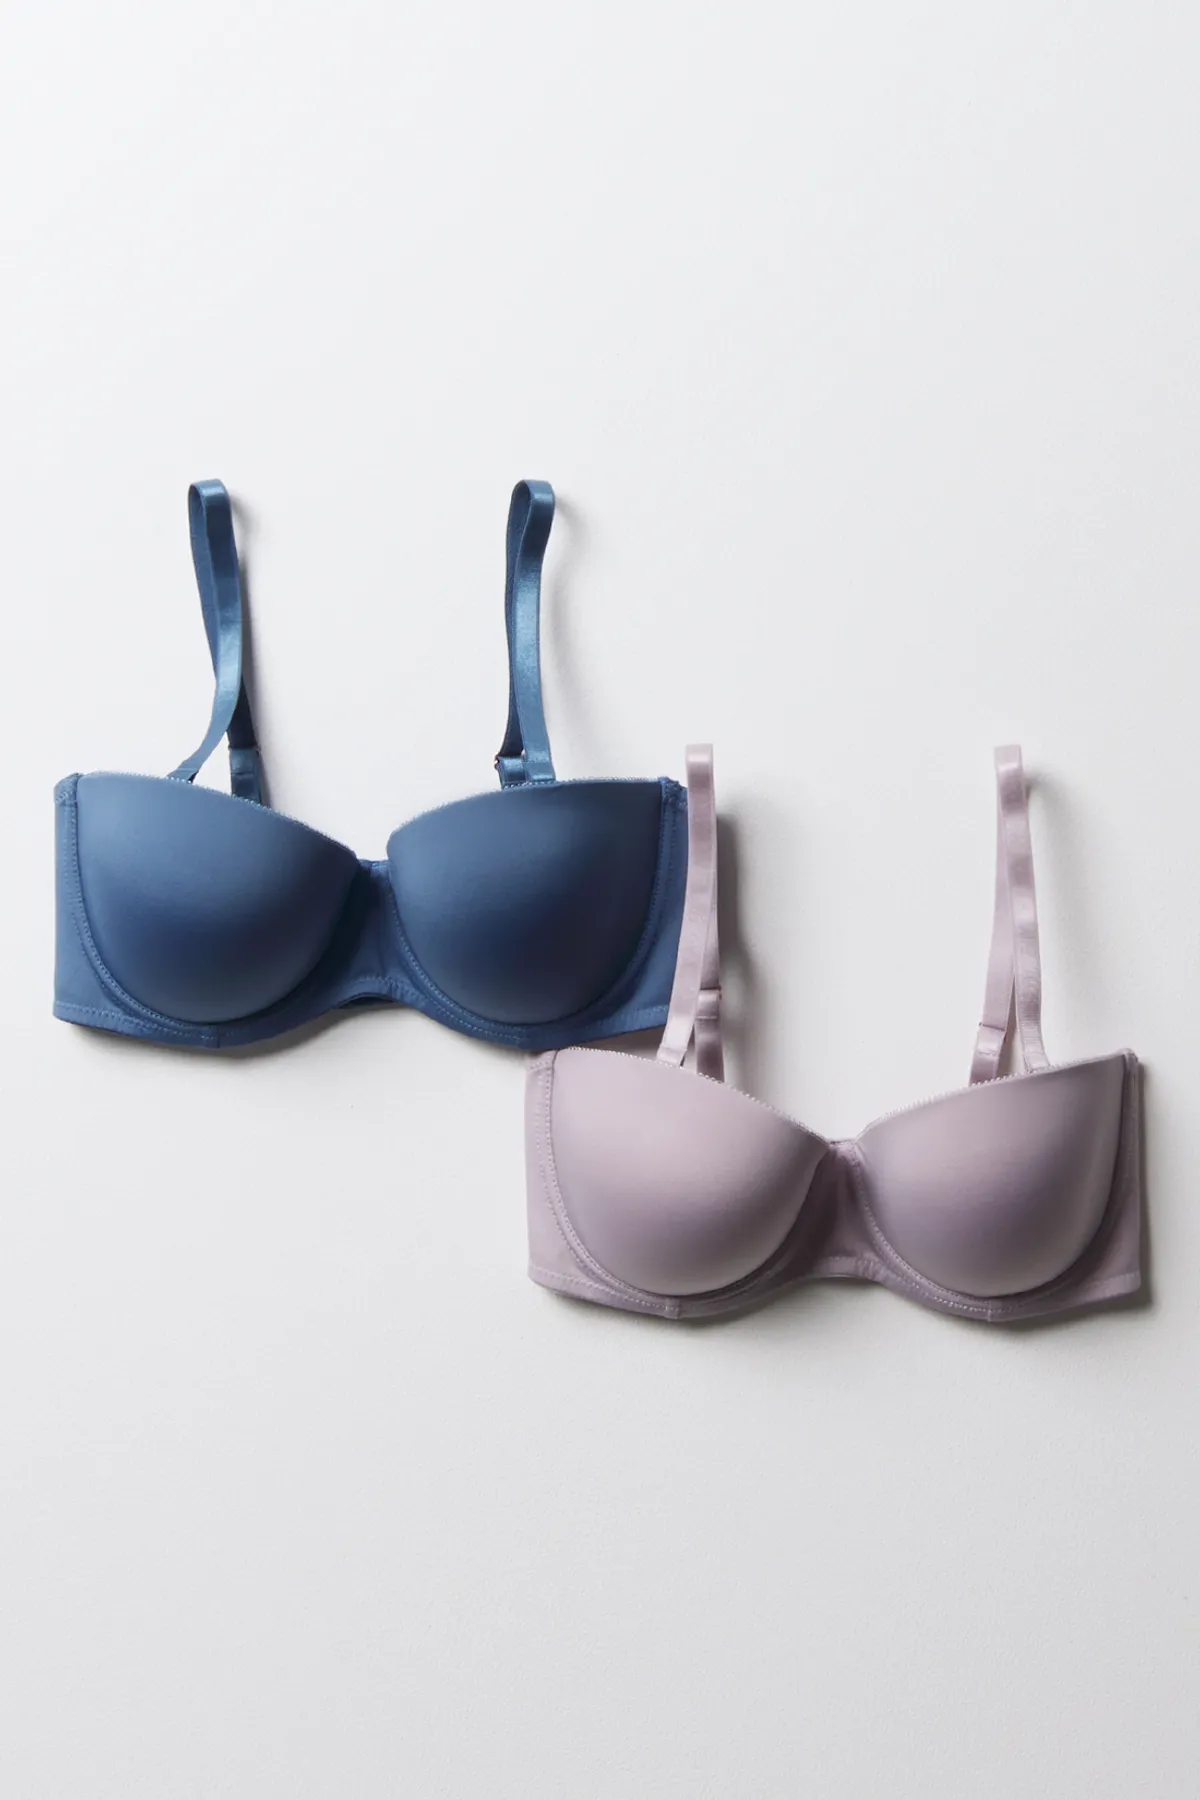 Padded Underwire Multiway Bras 2 Pack